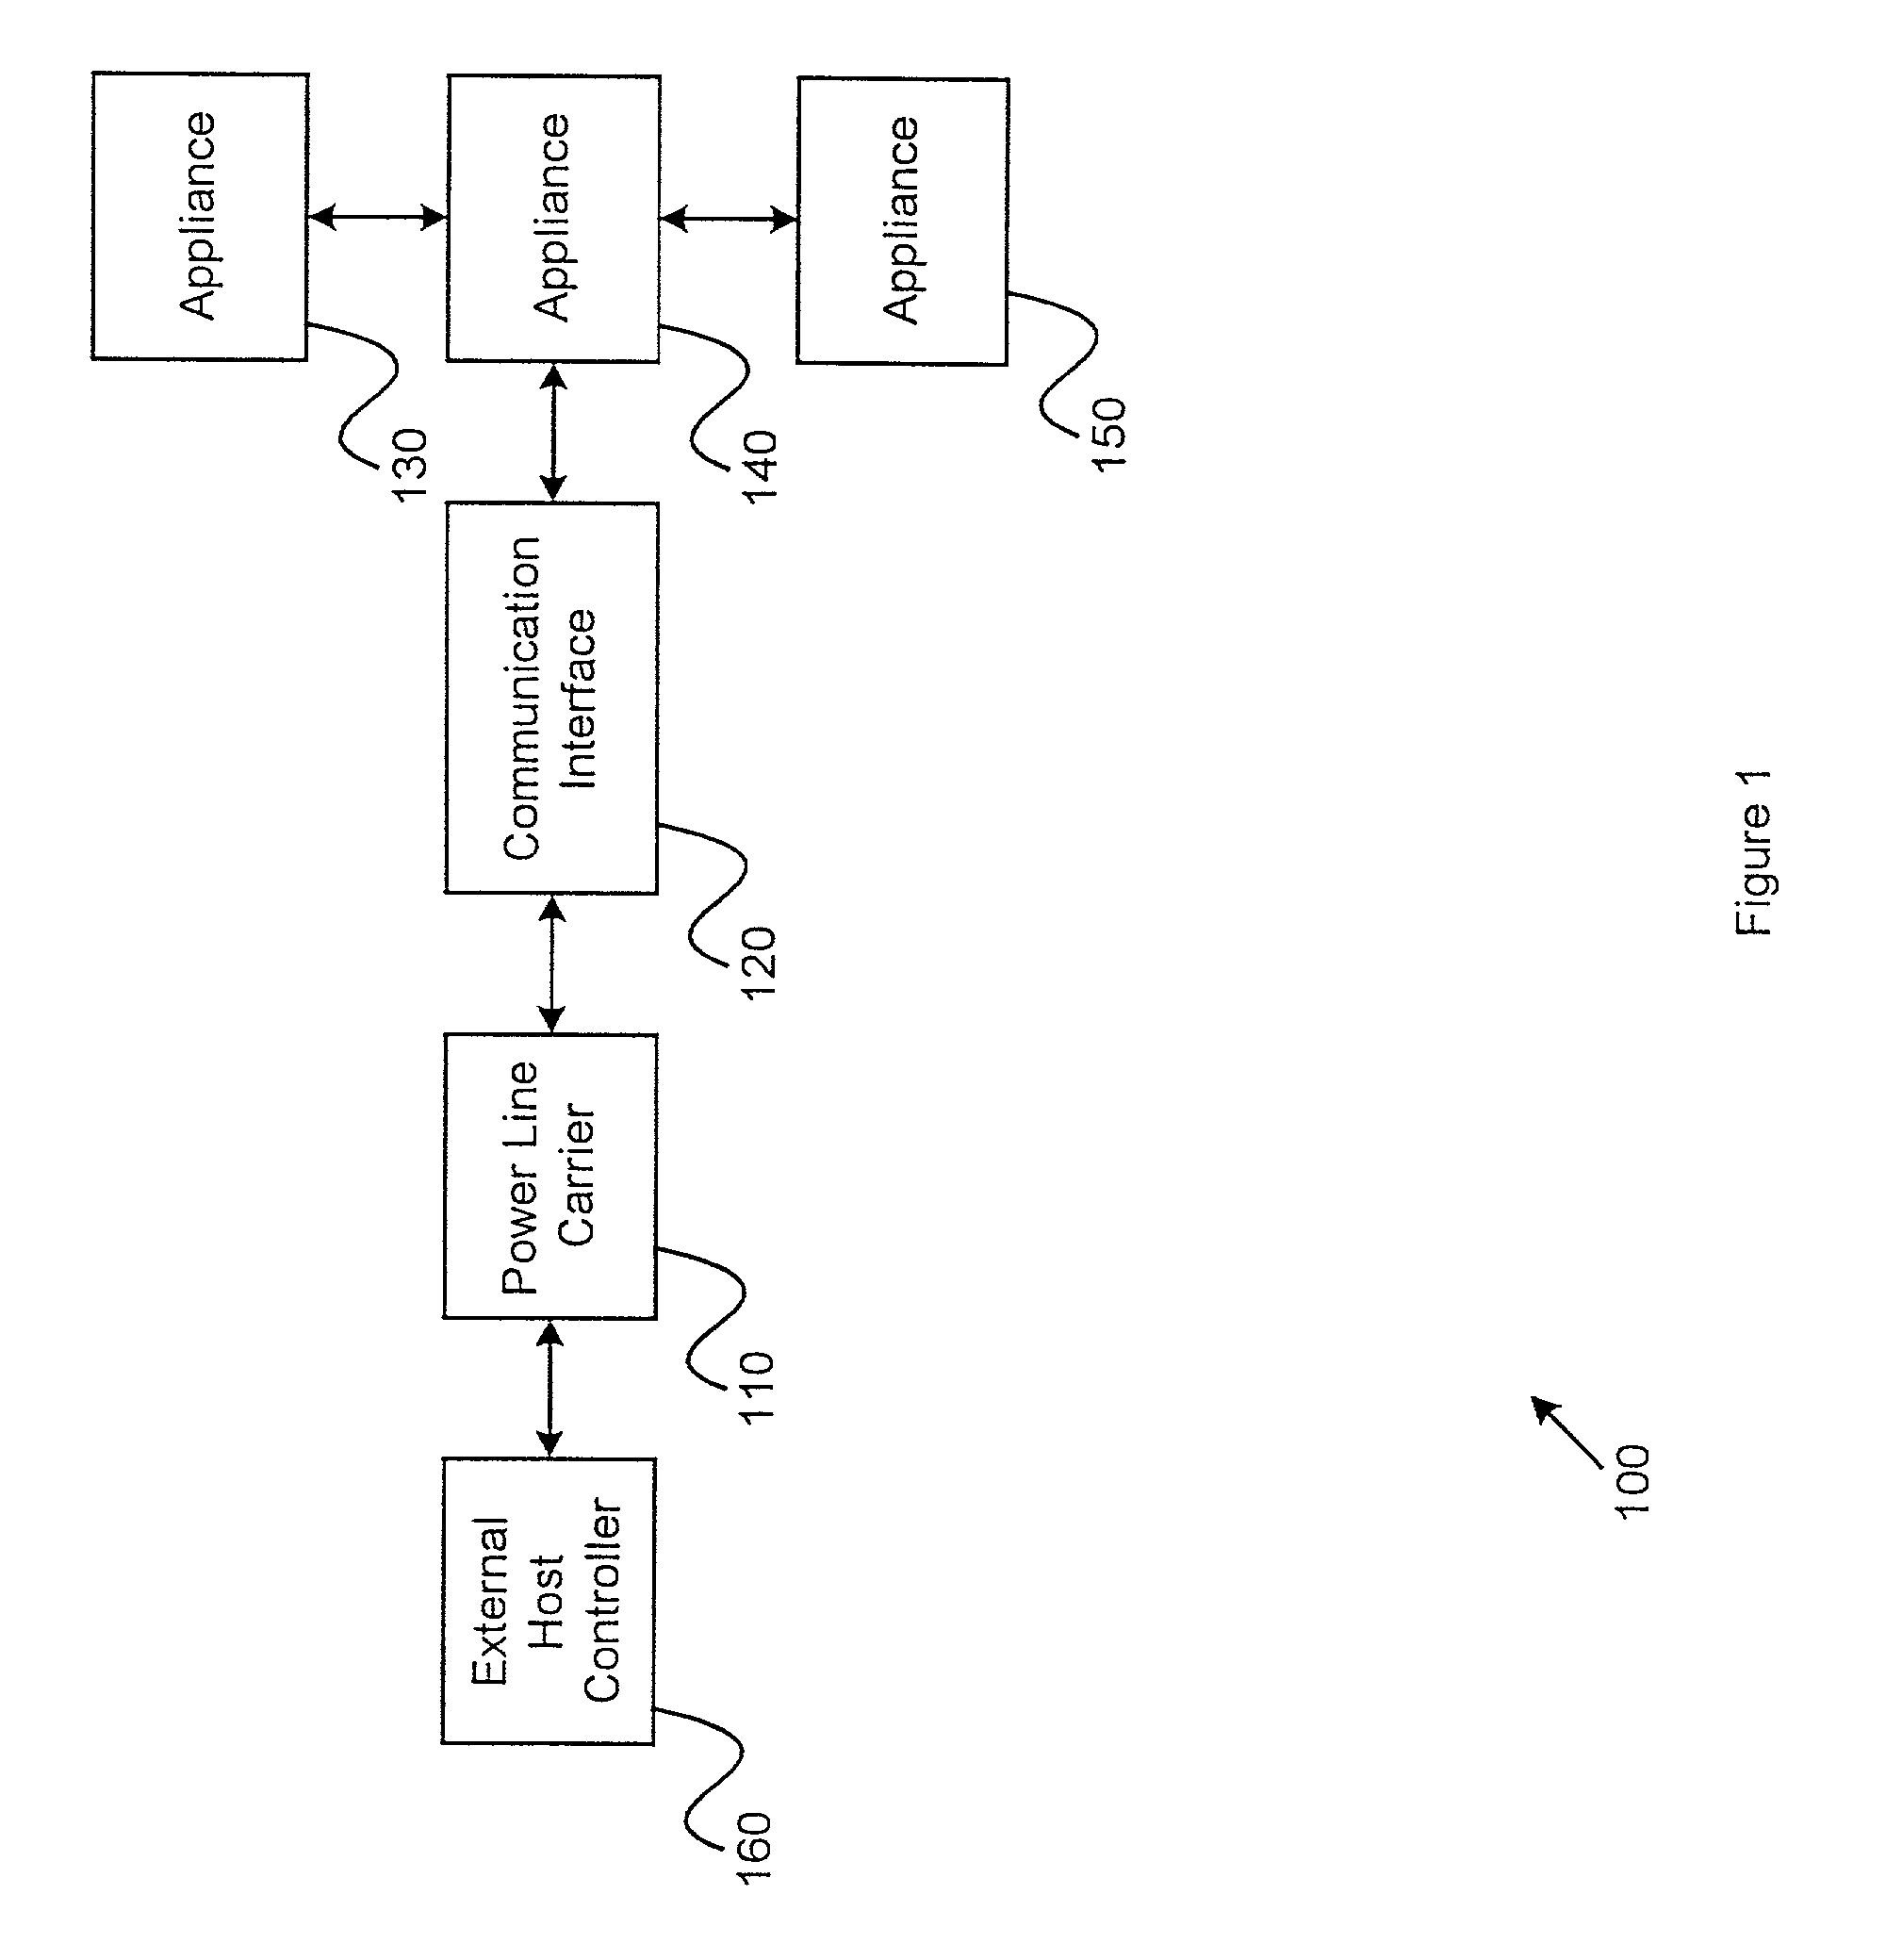 Method and apparatus for interfacing a power line carrier and an appliance